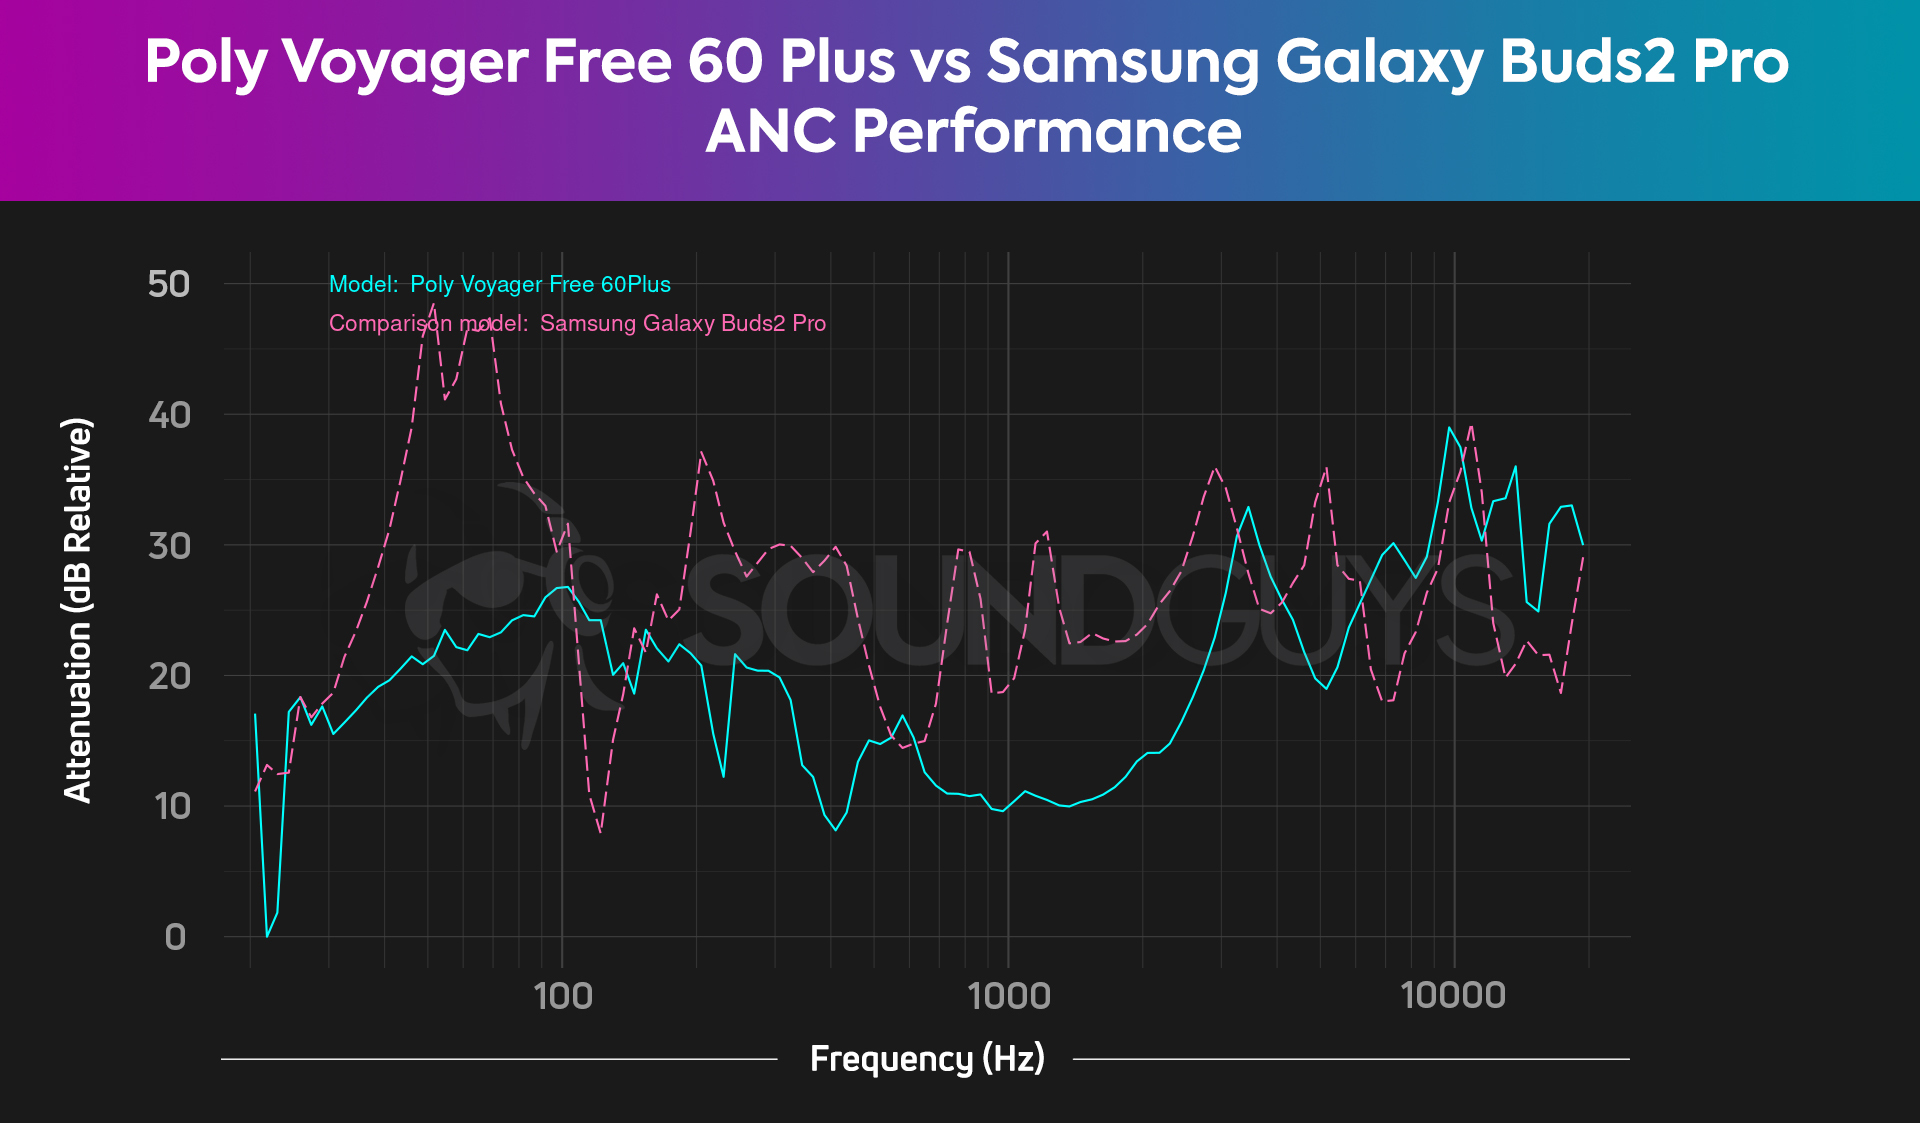 Poly Voyager Free 60+ UC ANC compared to Samsung Galaxy Buds2 Pro ANC chart.